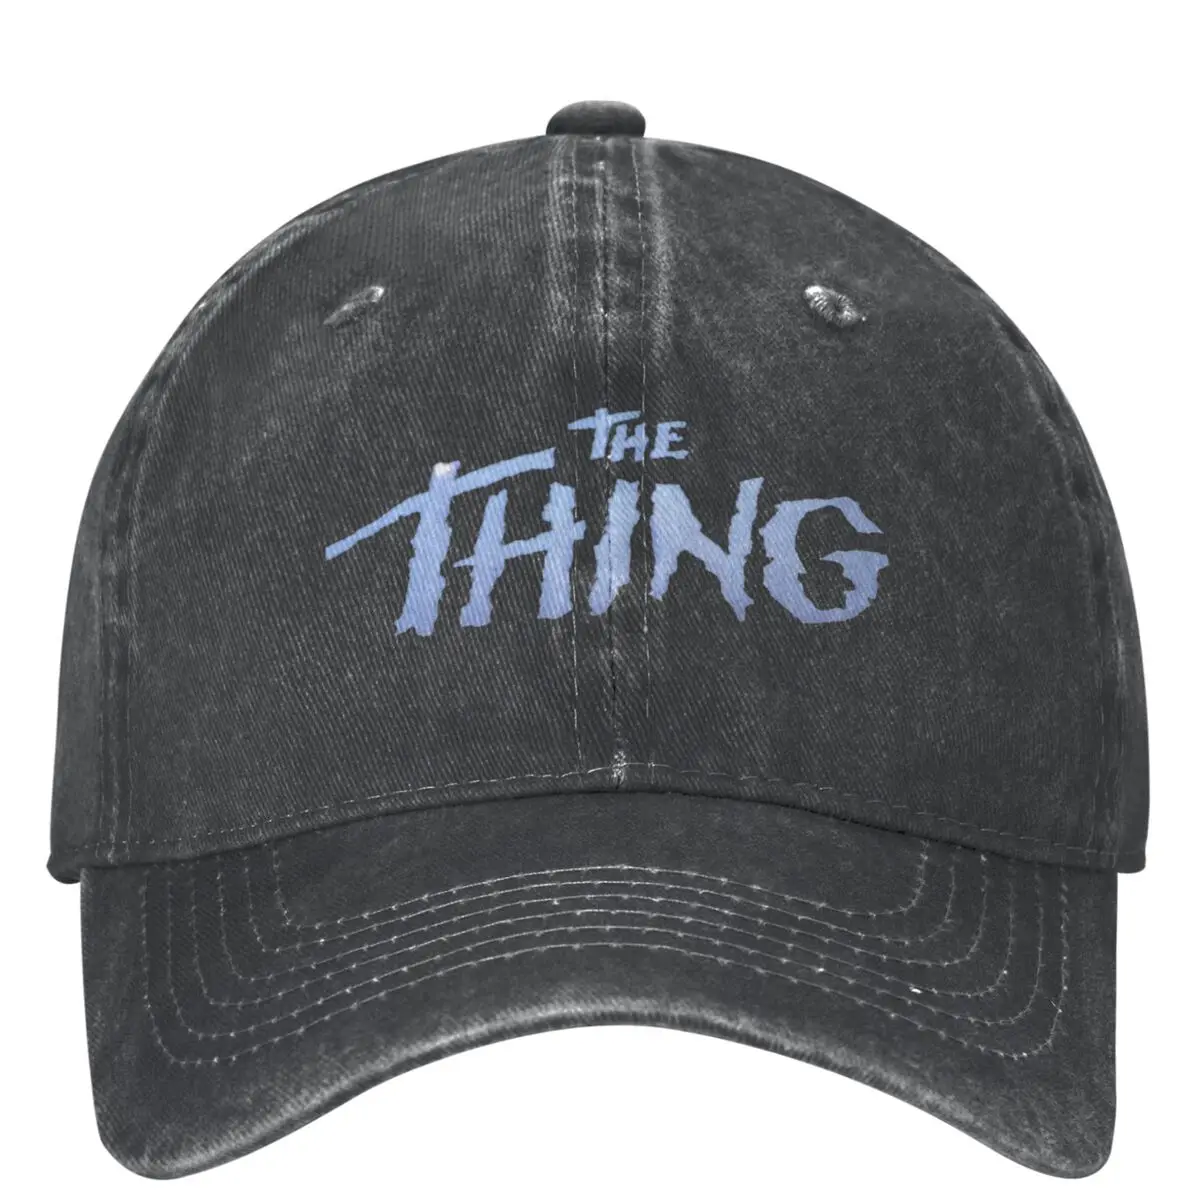 

The Thing Movie 1982 Film Baseball Caps Outfit Classic Distressed Denim Dad Hat Unisex Workouts Adjustable Fit Caps Hat